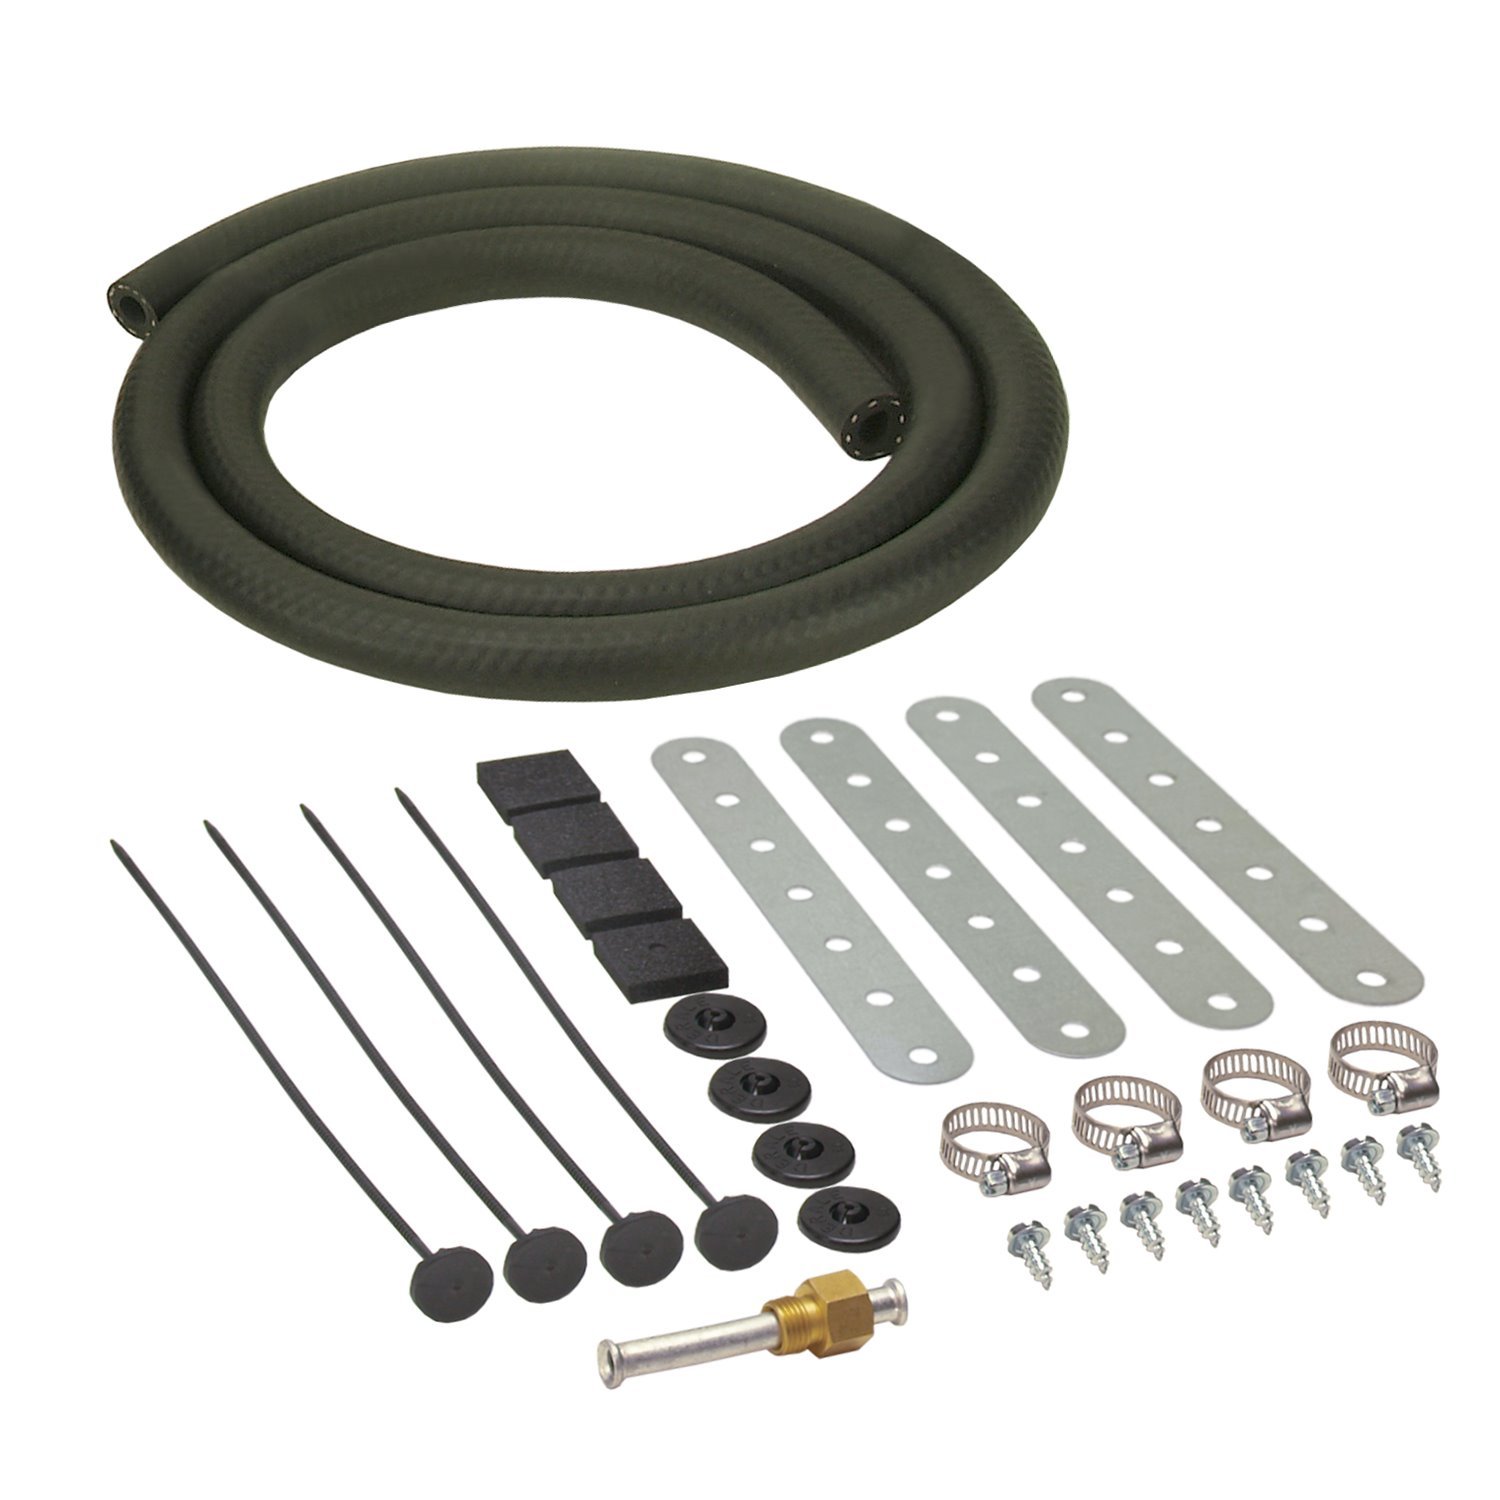 Deluxe Oil Cooler Installation Kit Plastic Rod and Rigid Mount Kits